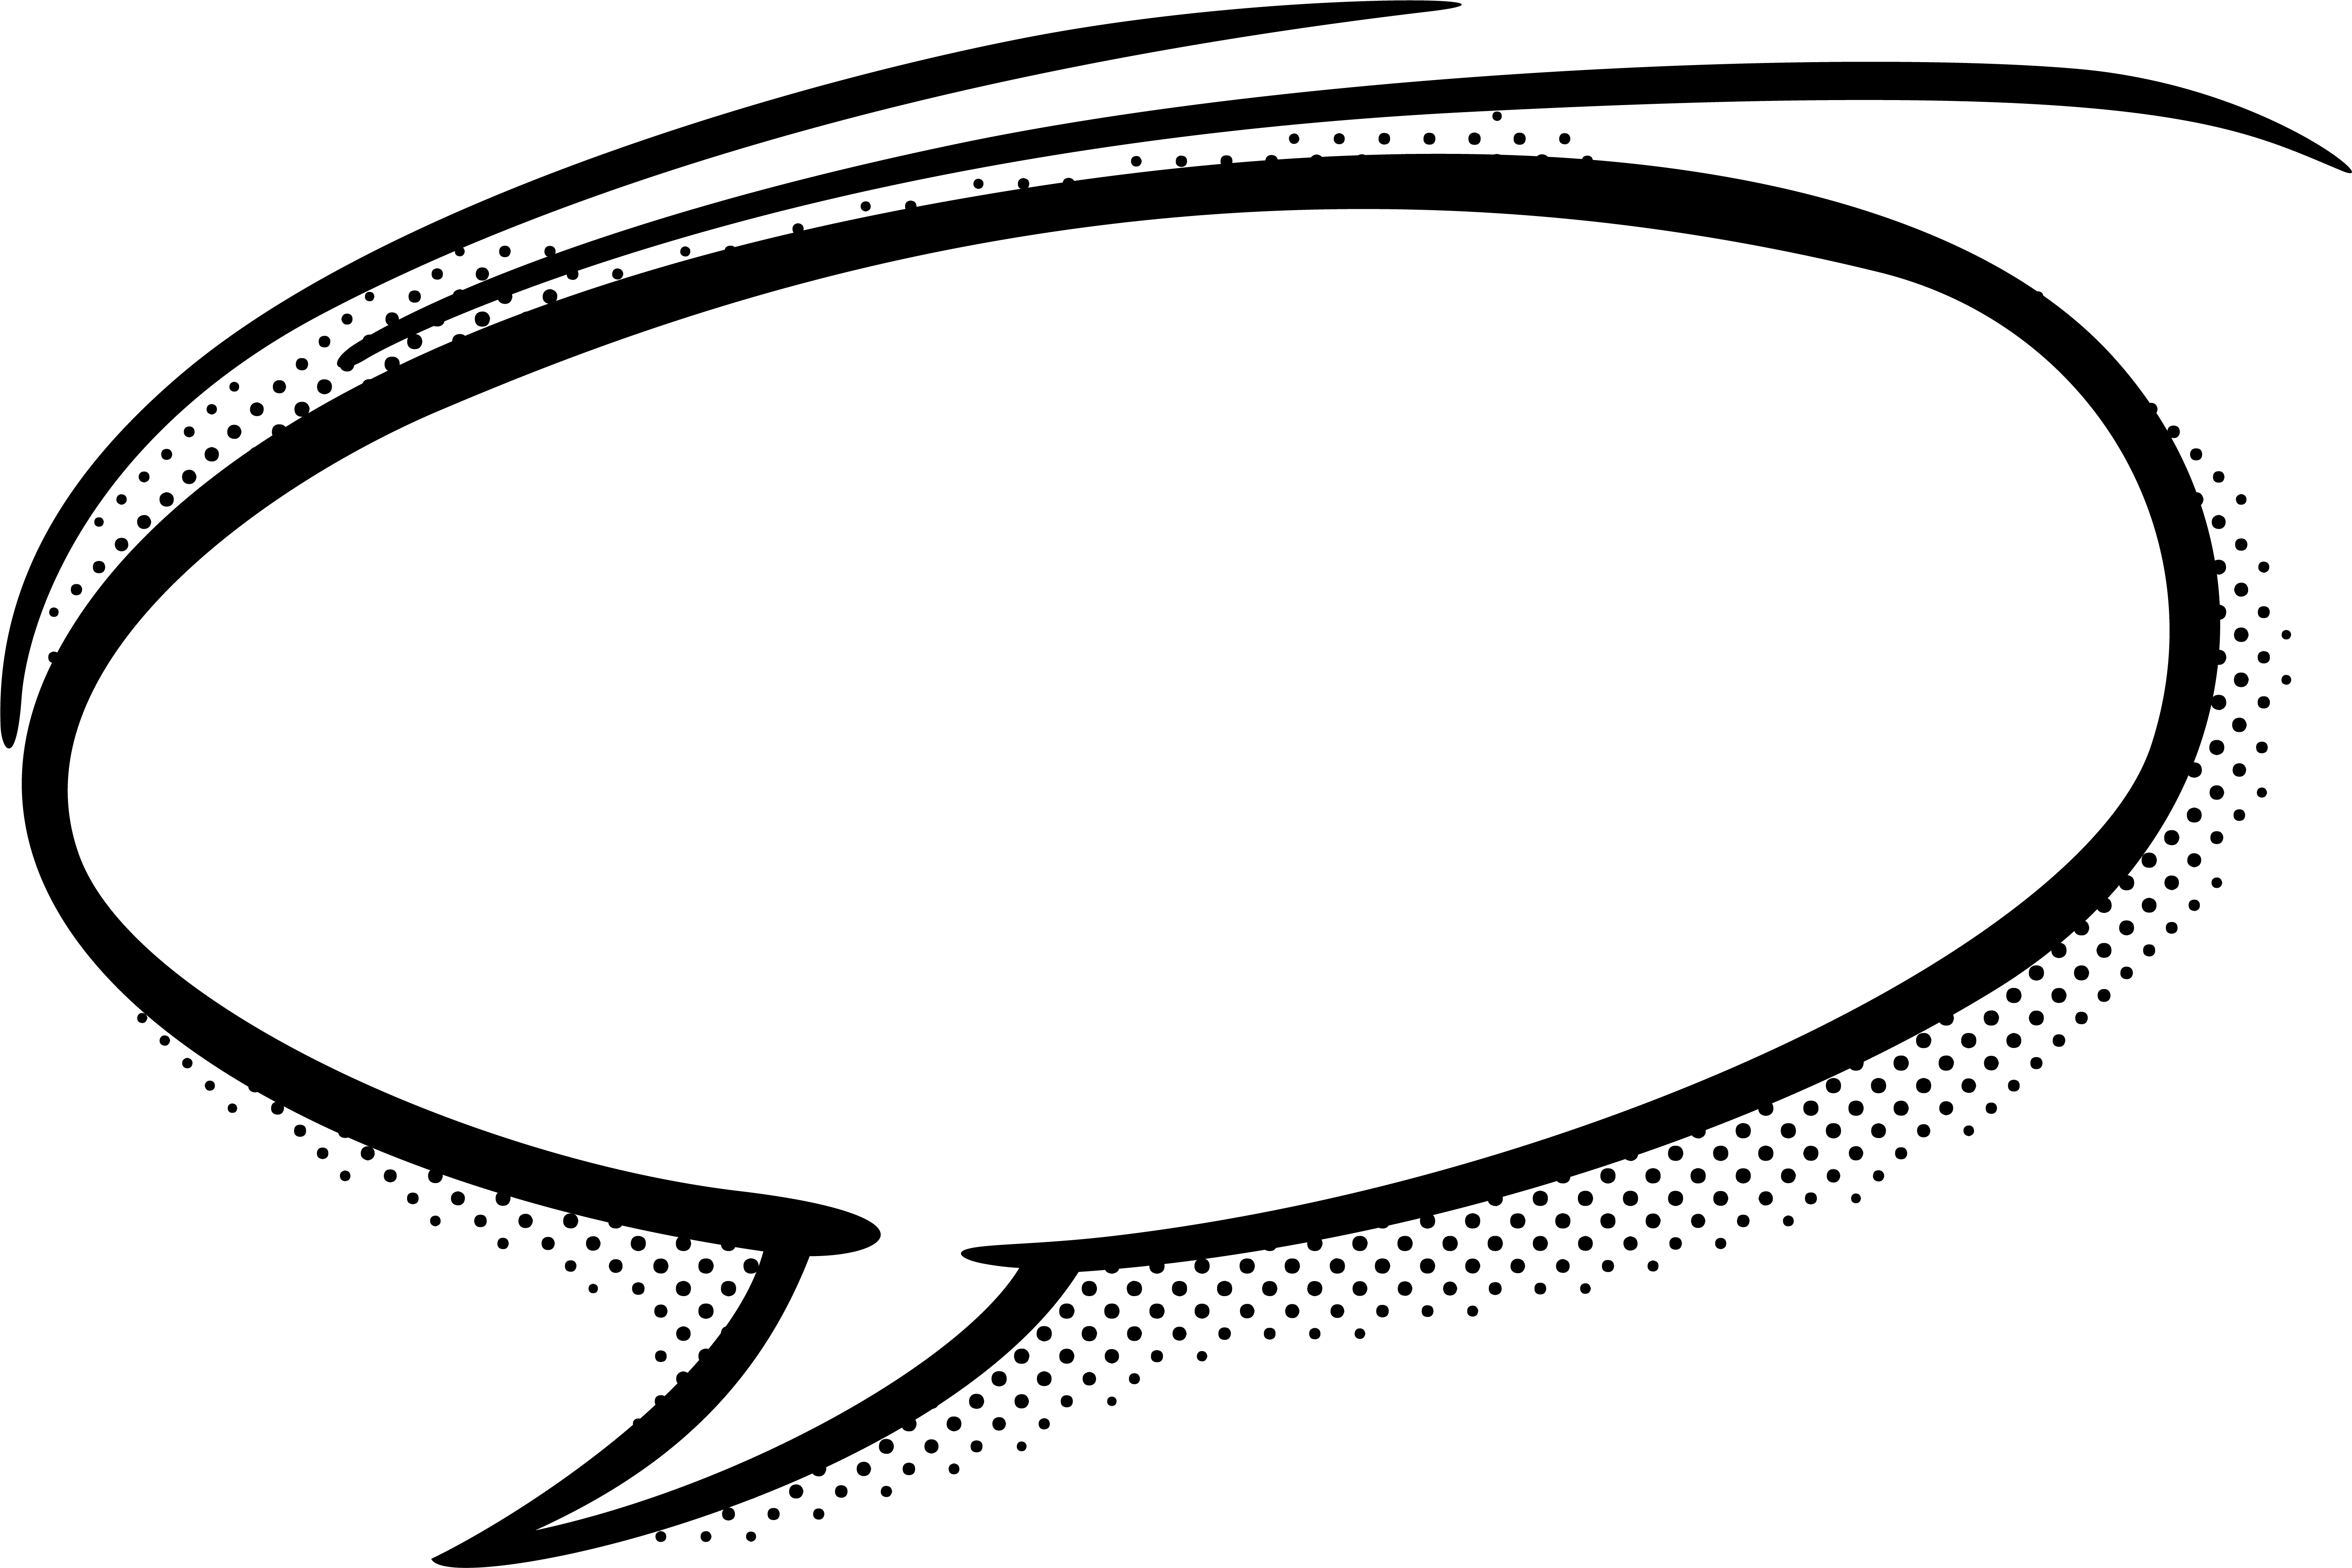 Speech bubbles clipart. Free download transparent .PNG Clipart Library ...